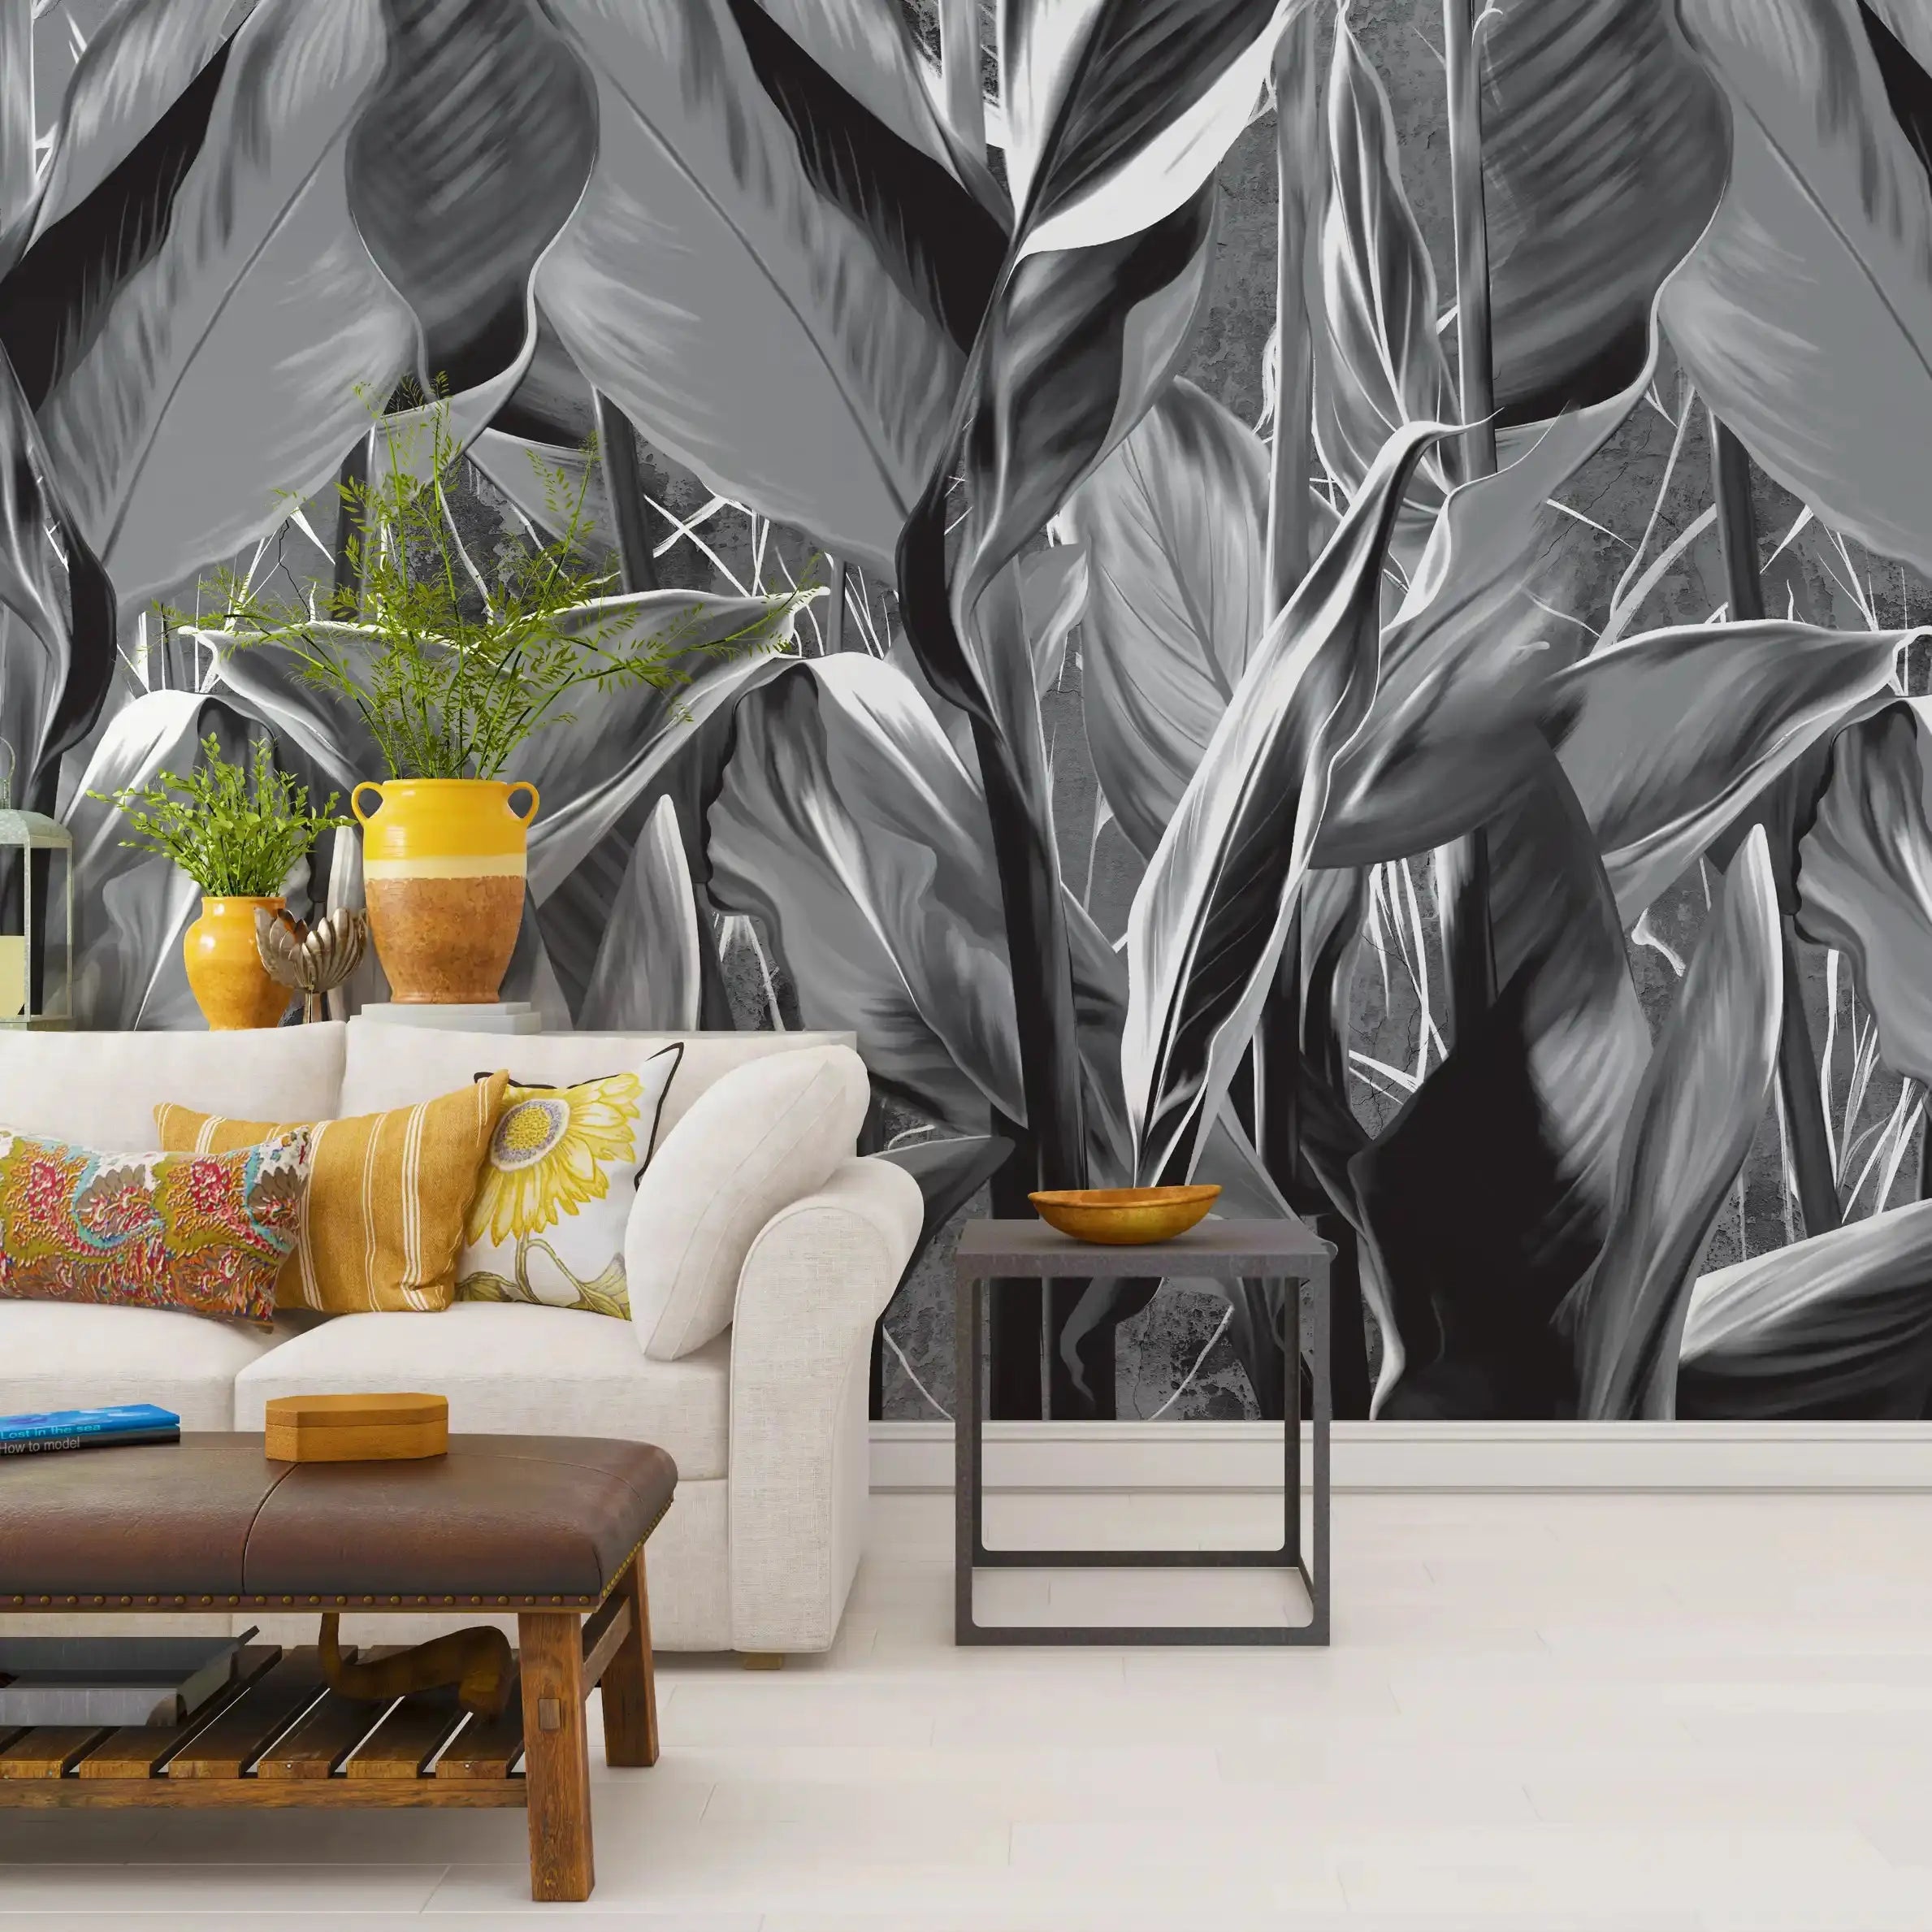 3007-E / Peel and Stick Wallpaper: Tropical Plant Design for Modern Home Decor, Easy to Install and Remove Wall Mural - Artevella